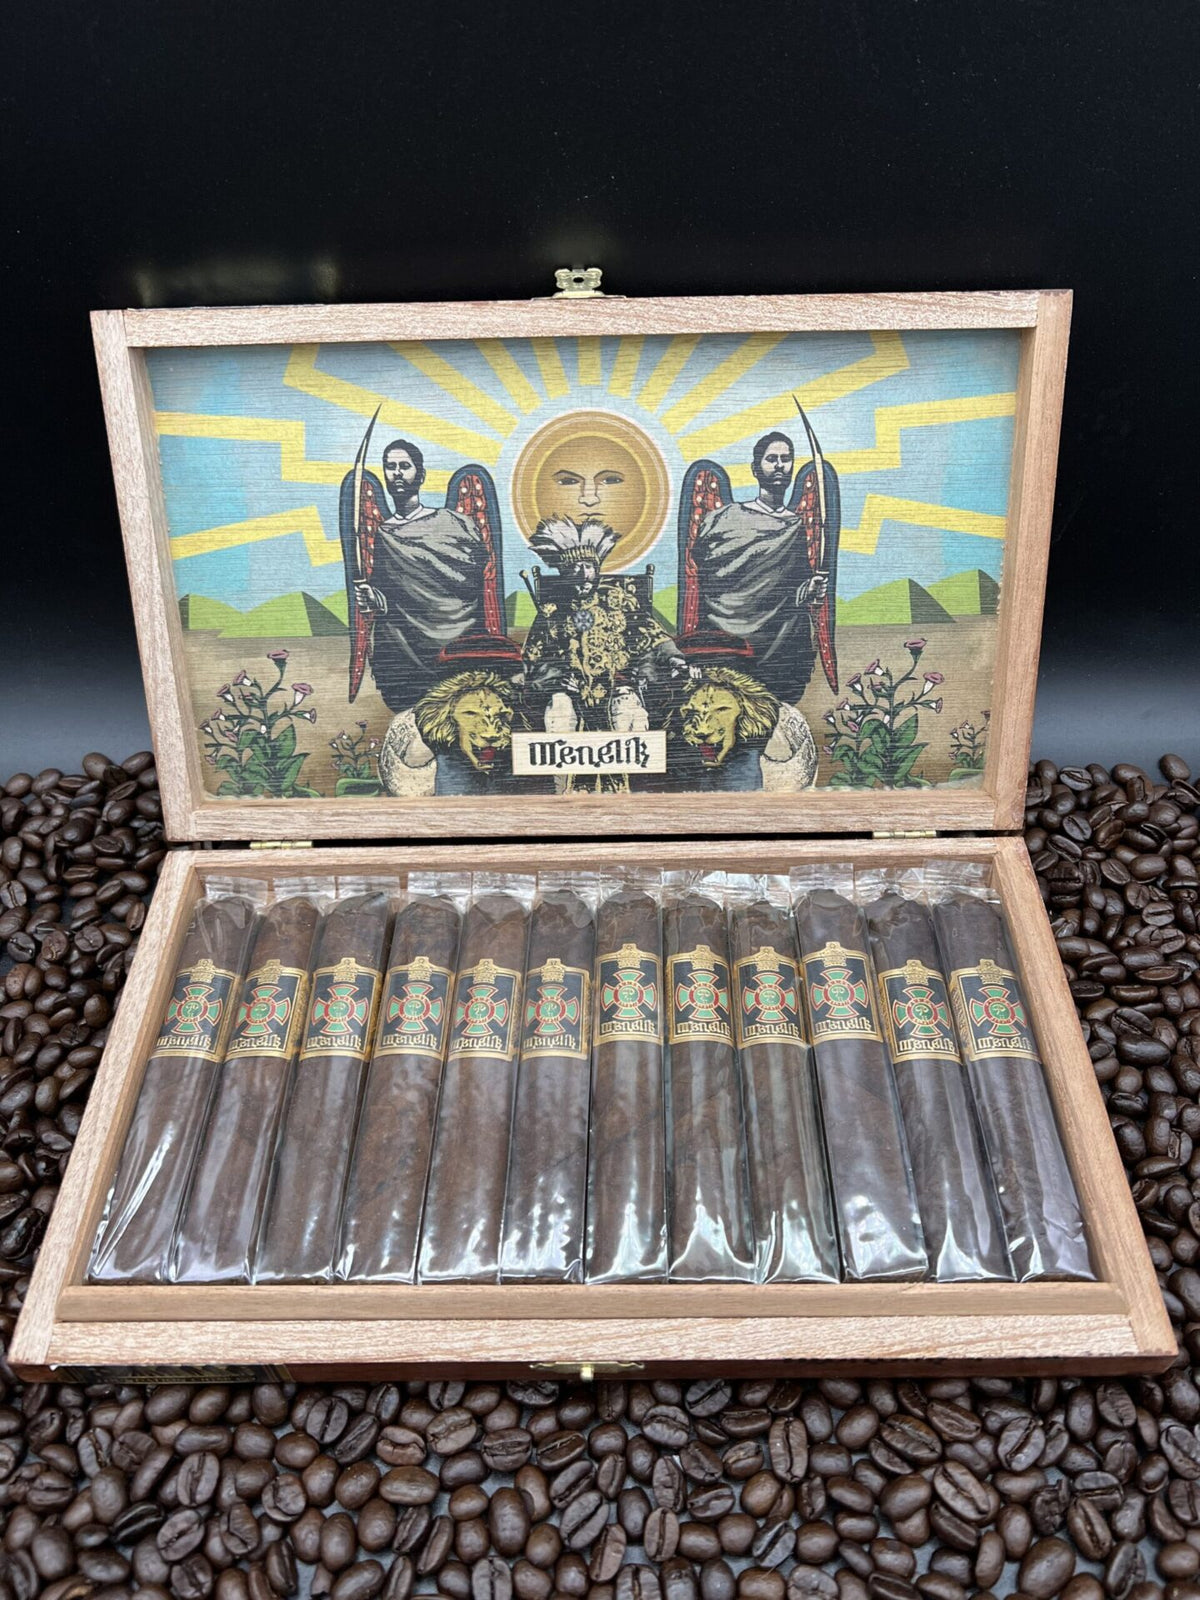 Foundation Cigars - Menelik Robusto cigars supplied by Sir Louis Cigars